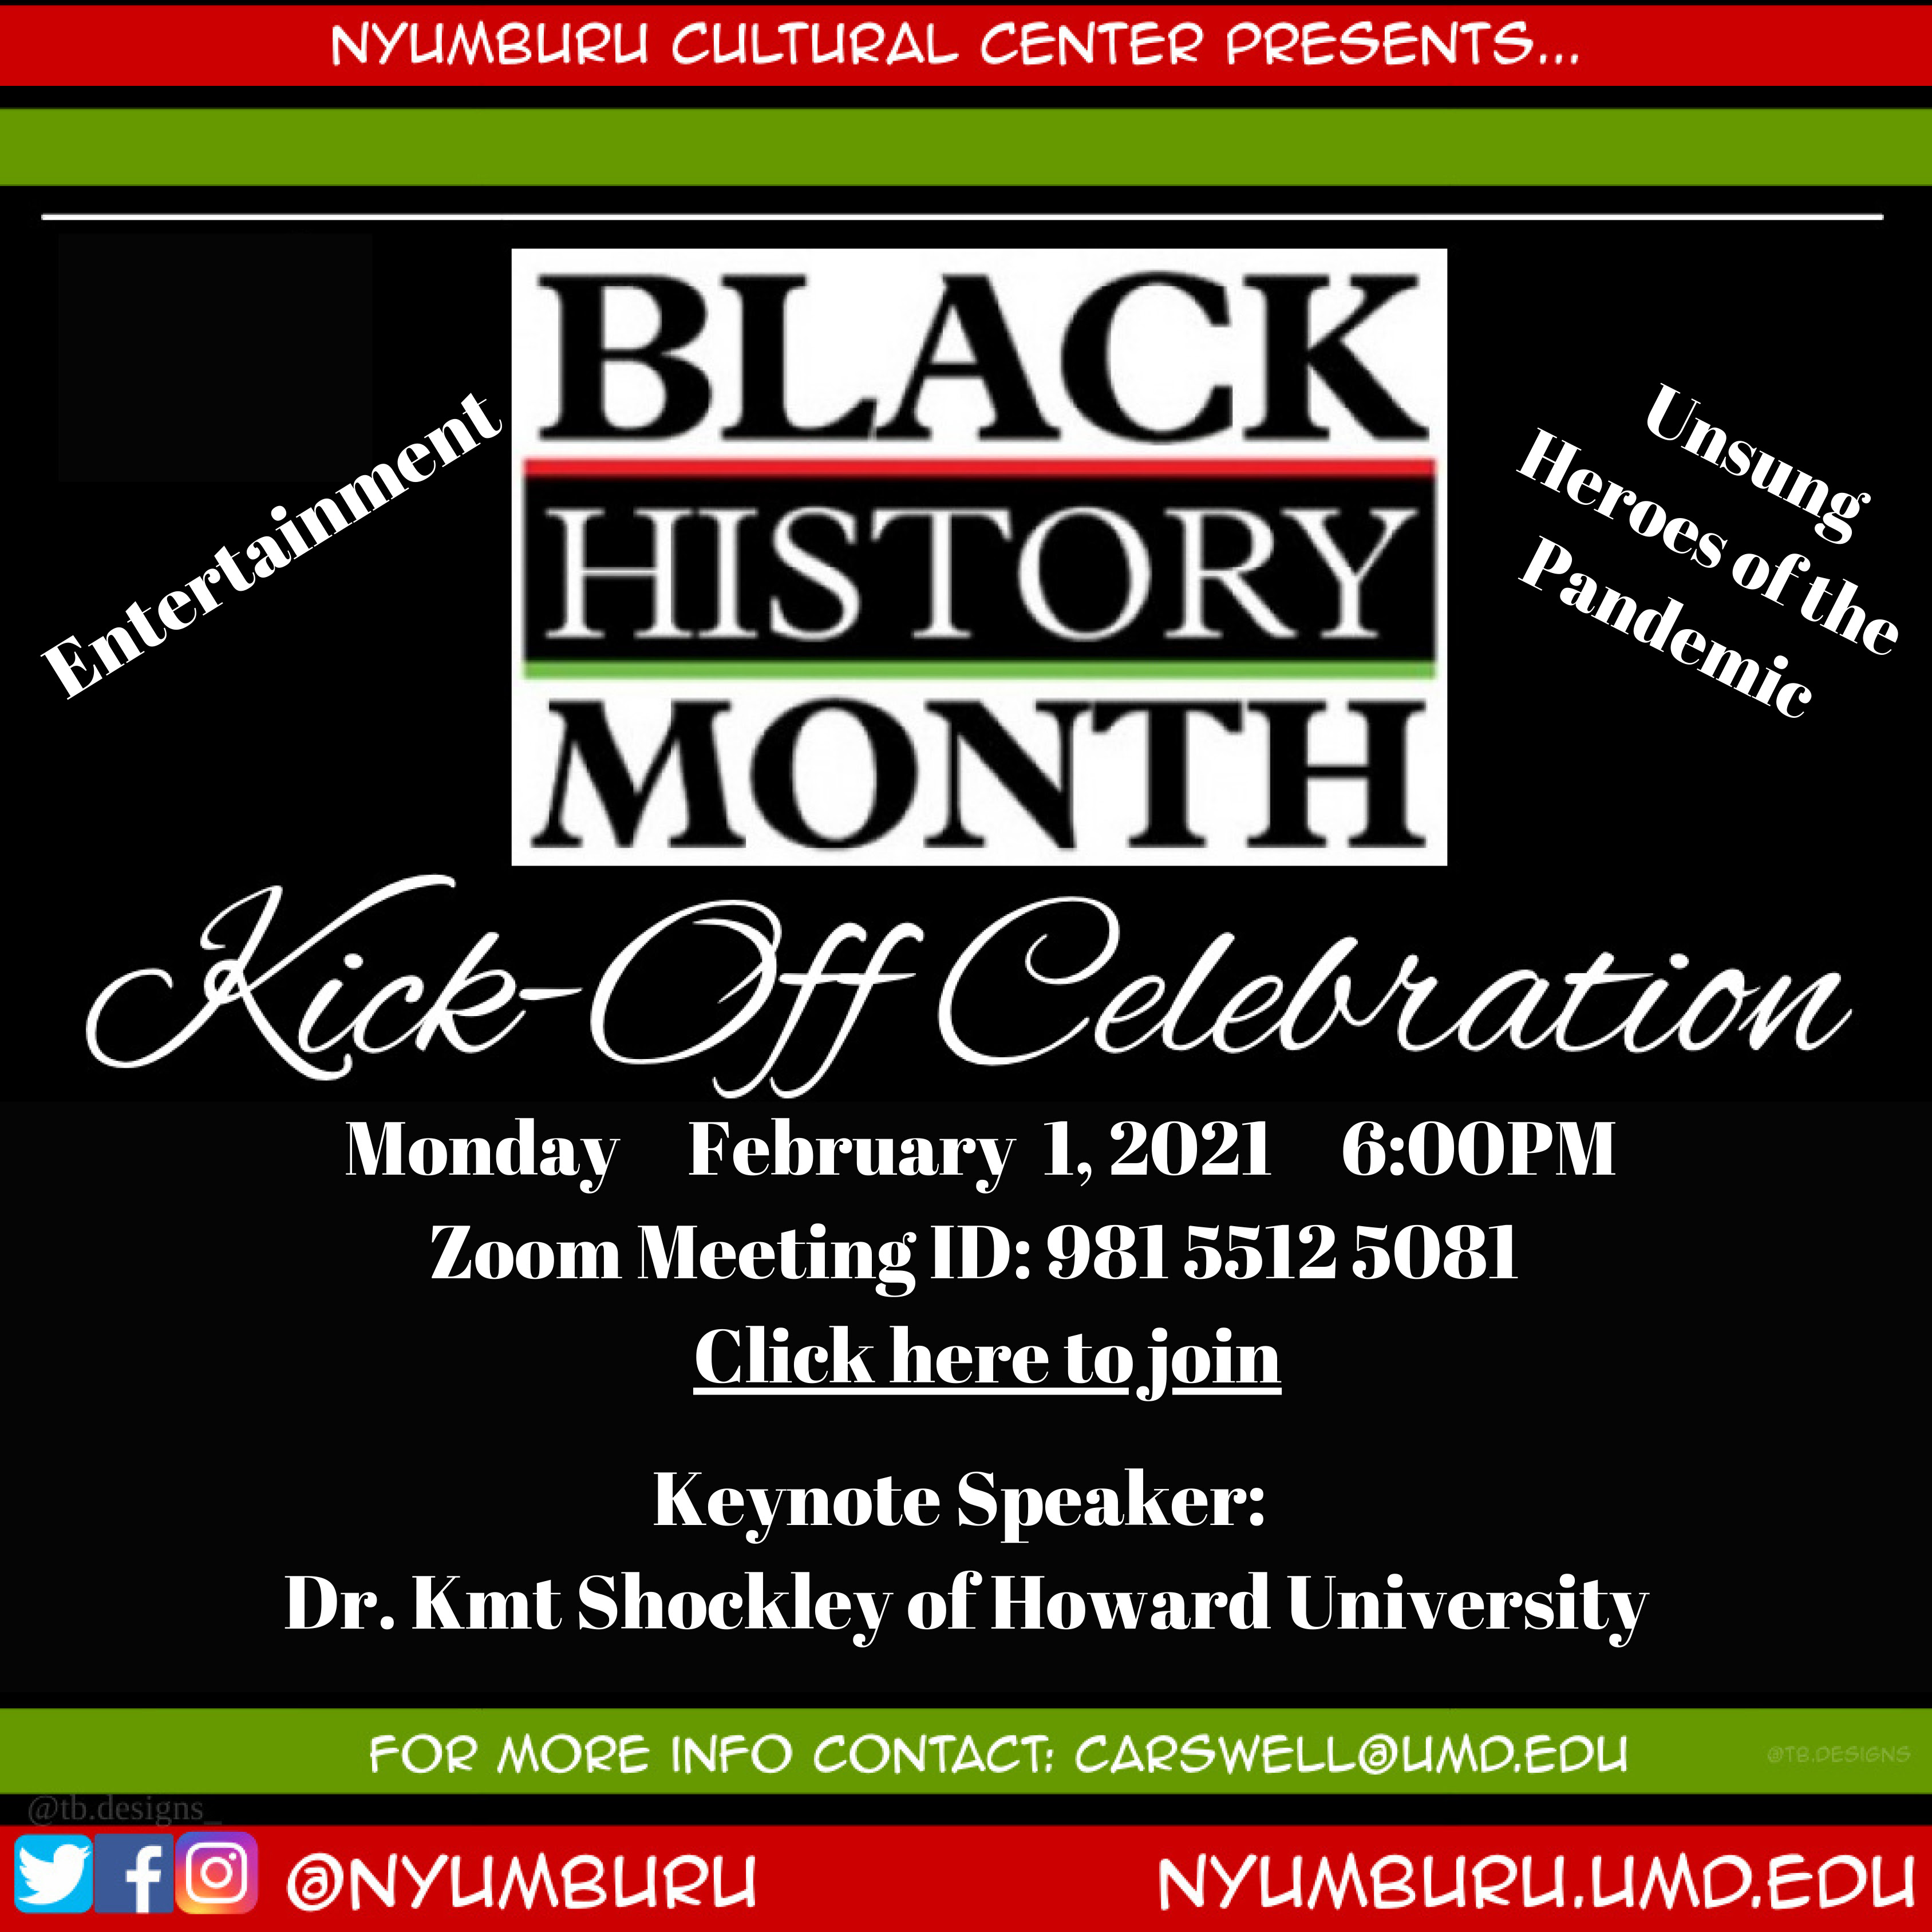 Text reads Nyumburu Cultural Center presents Black History Month Kick-off Celebration. Monday, February 1, 2021 6pm. Zoom meeting ID: 981 5512 5081. Keynote speaker: Dr. Kmt Shockley of Howard University. For more info contact carswell@umd.edu